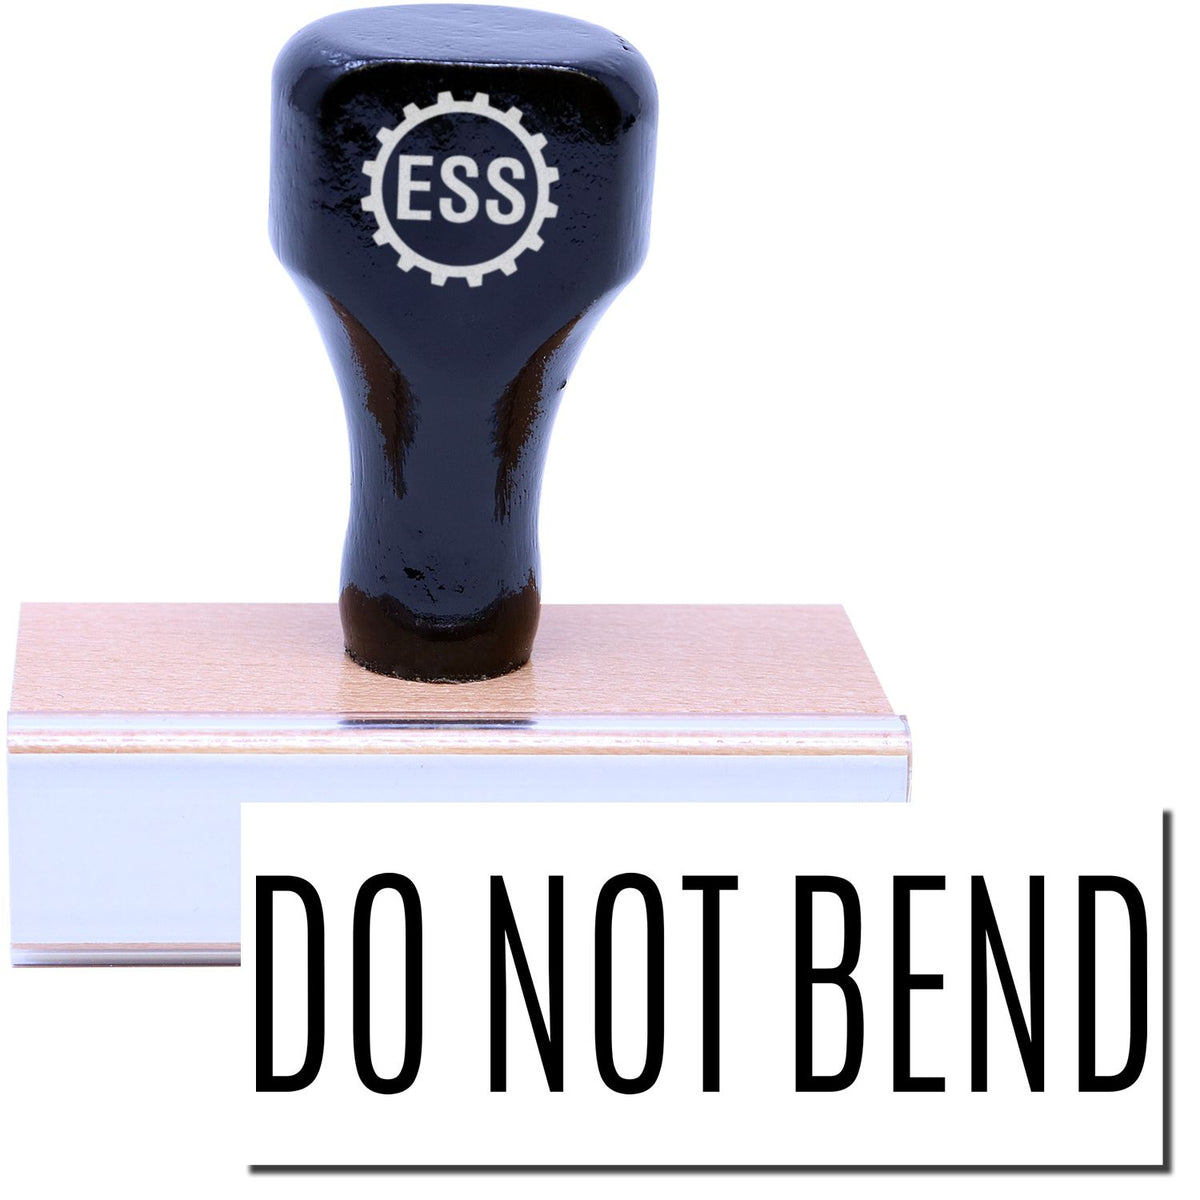 A stock office rubber stamp with a stamped image showing how the text &quot;DO NOT BEND&quot; is displayed after stamping.